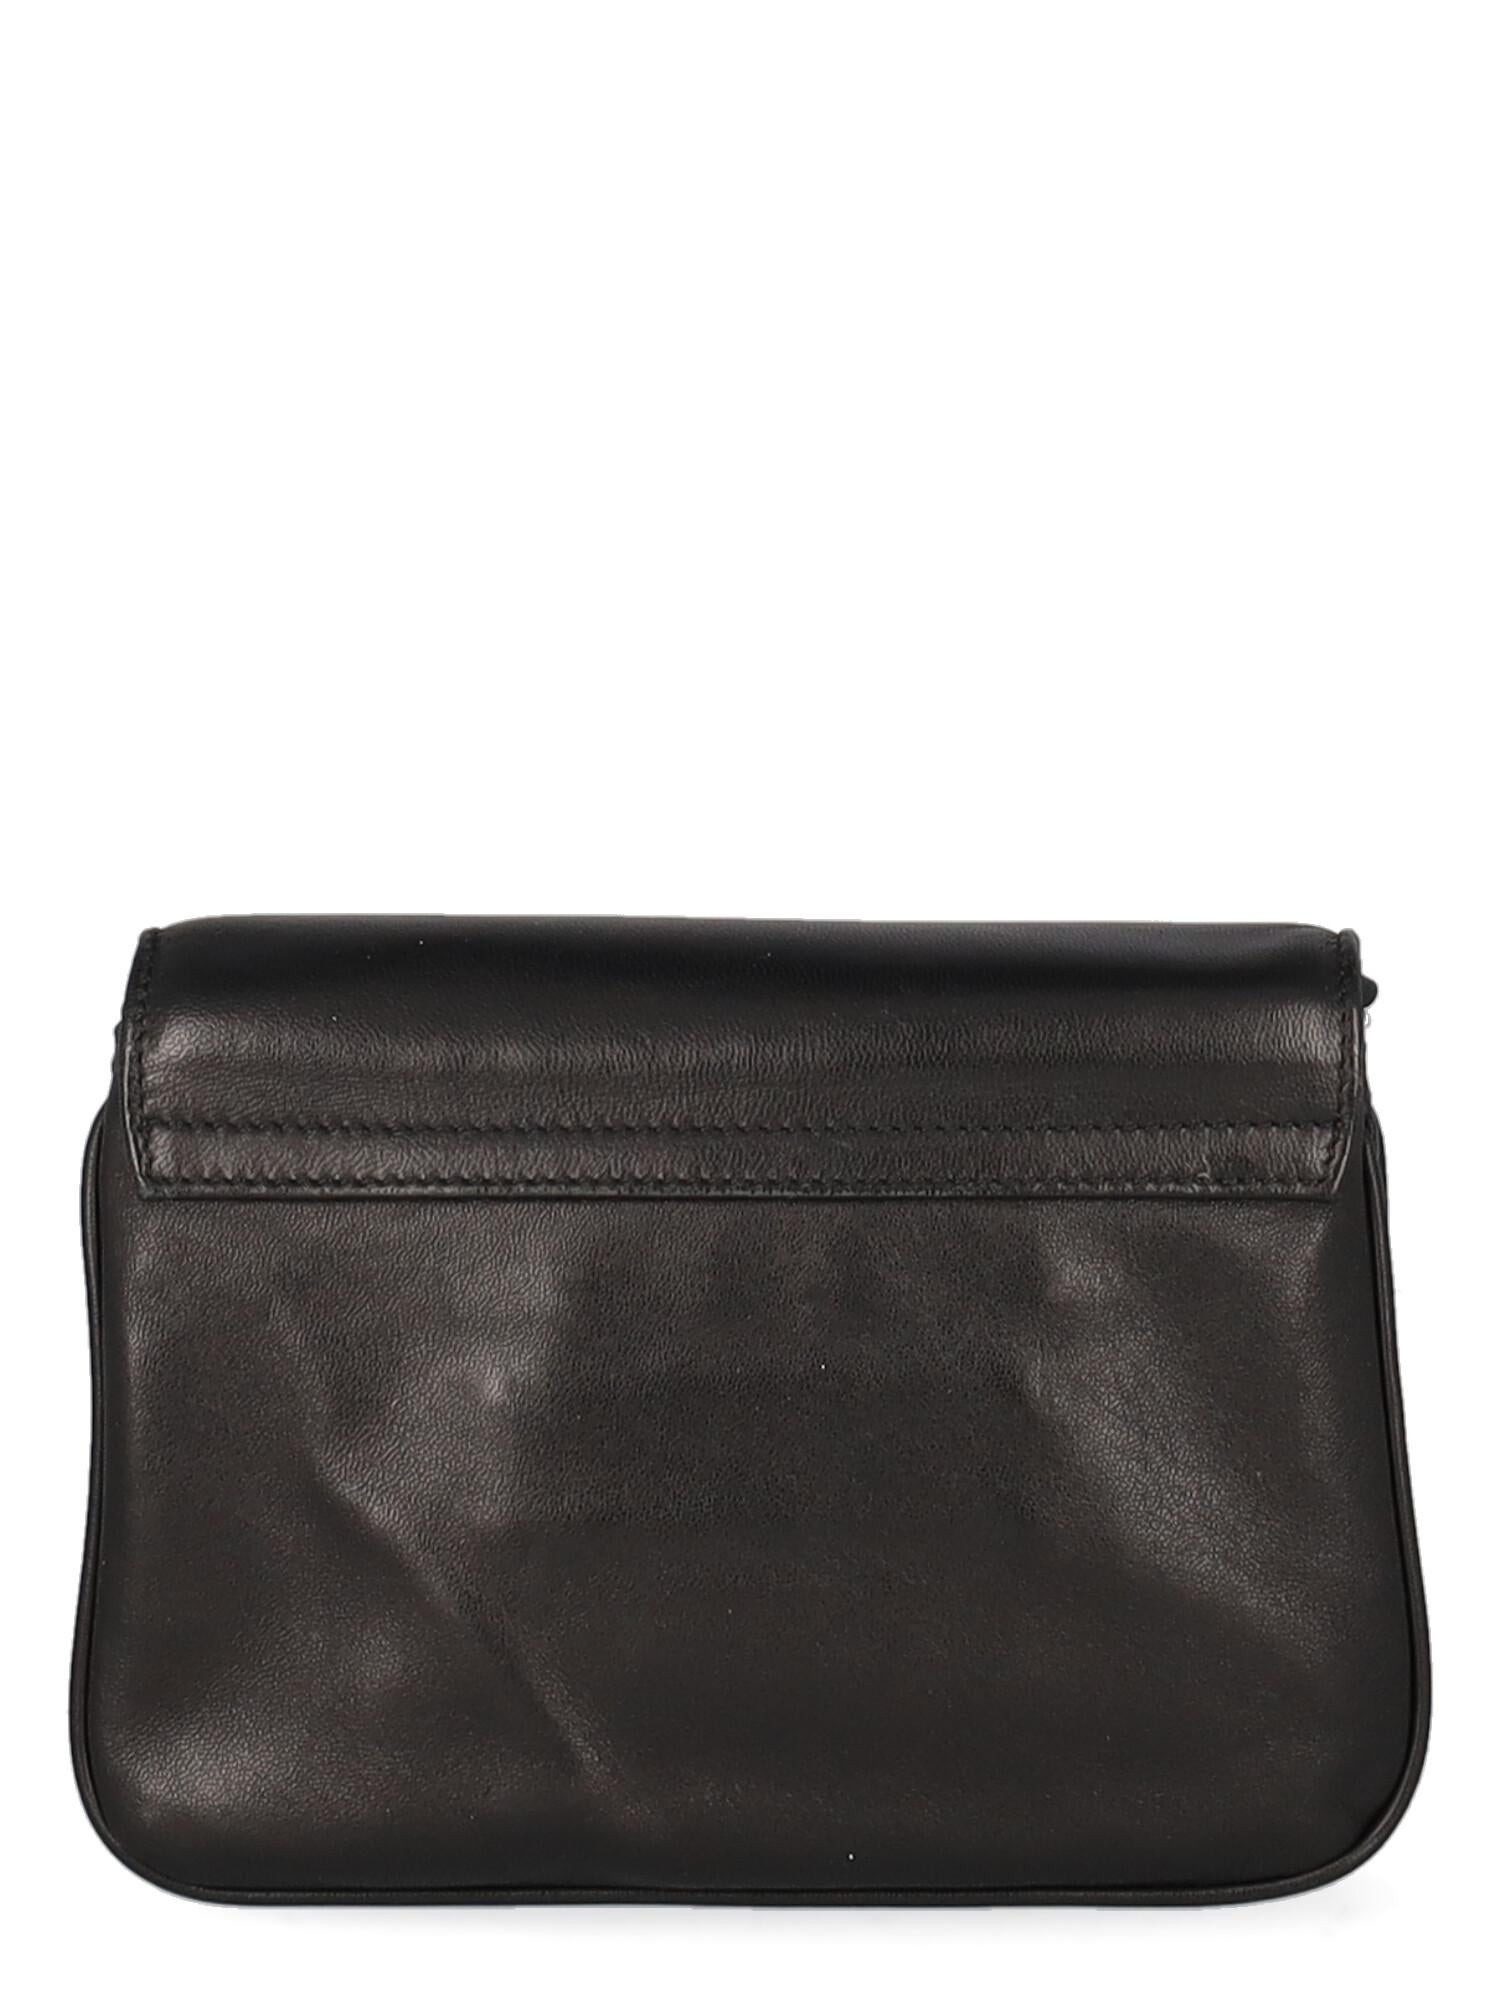 Valentino Women Shoulder bags Black Leather  In Good Condition For Sale In Milan, IT